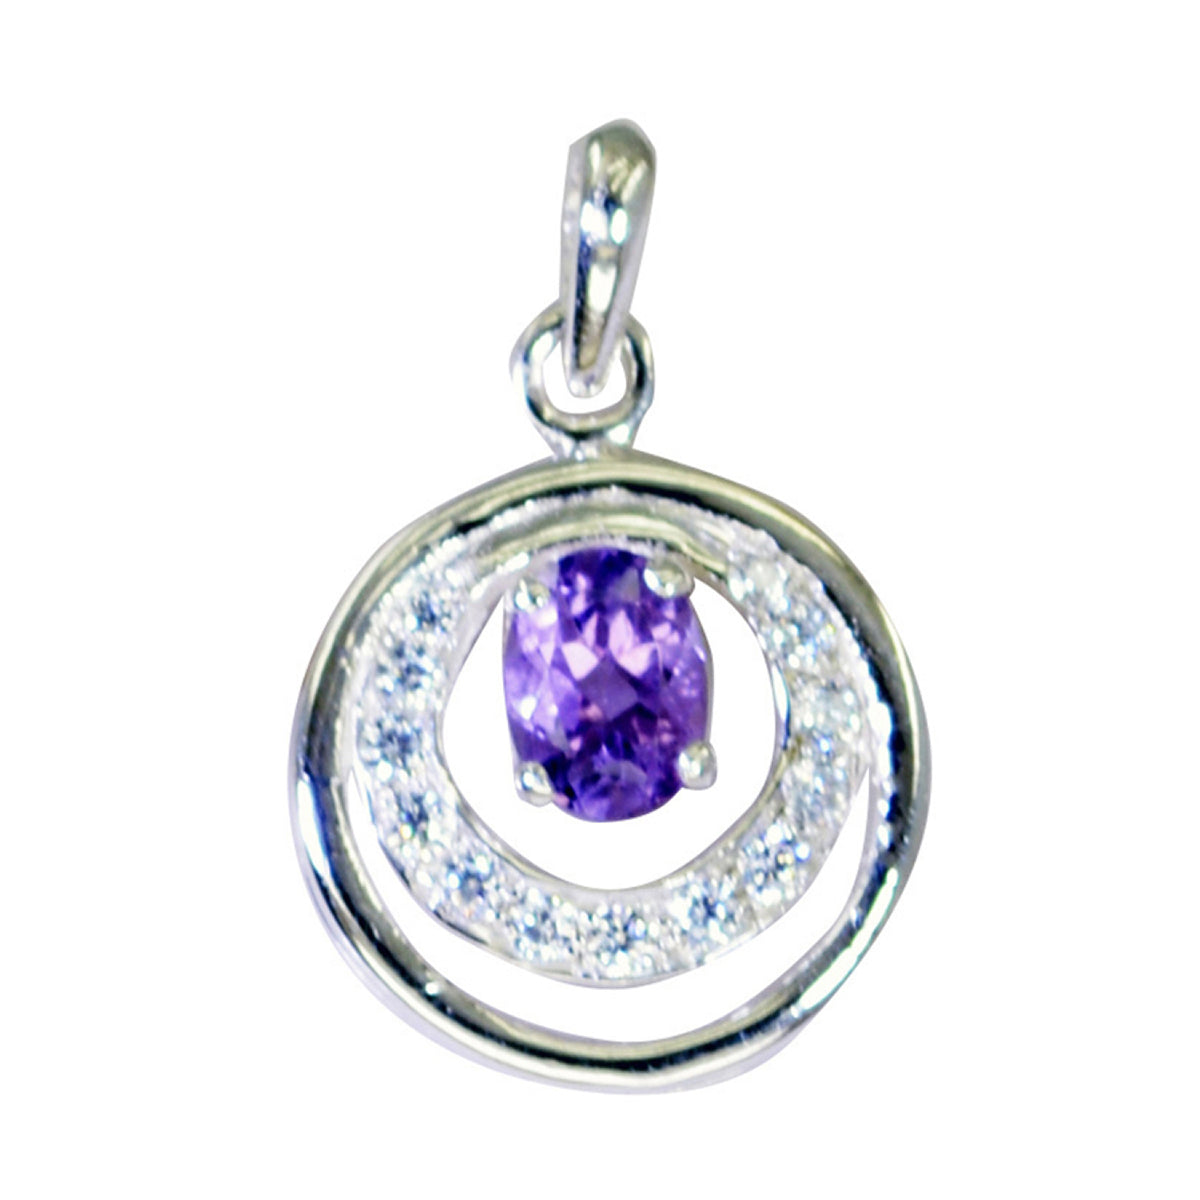 Riyo Attractive Gems Oval Faceted Purple Amethyst Silver Pendant Gift For Boxing Day